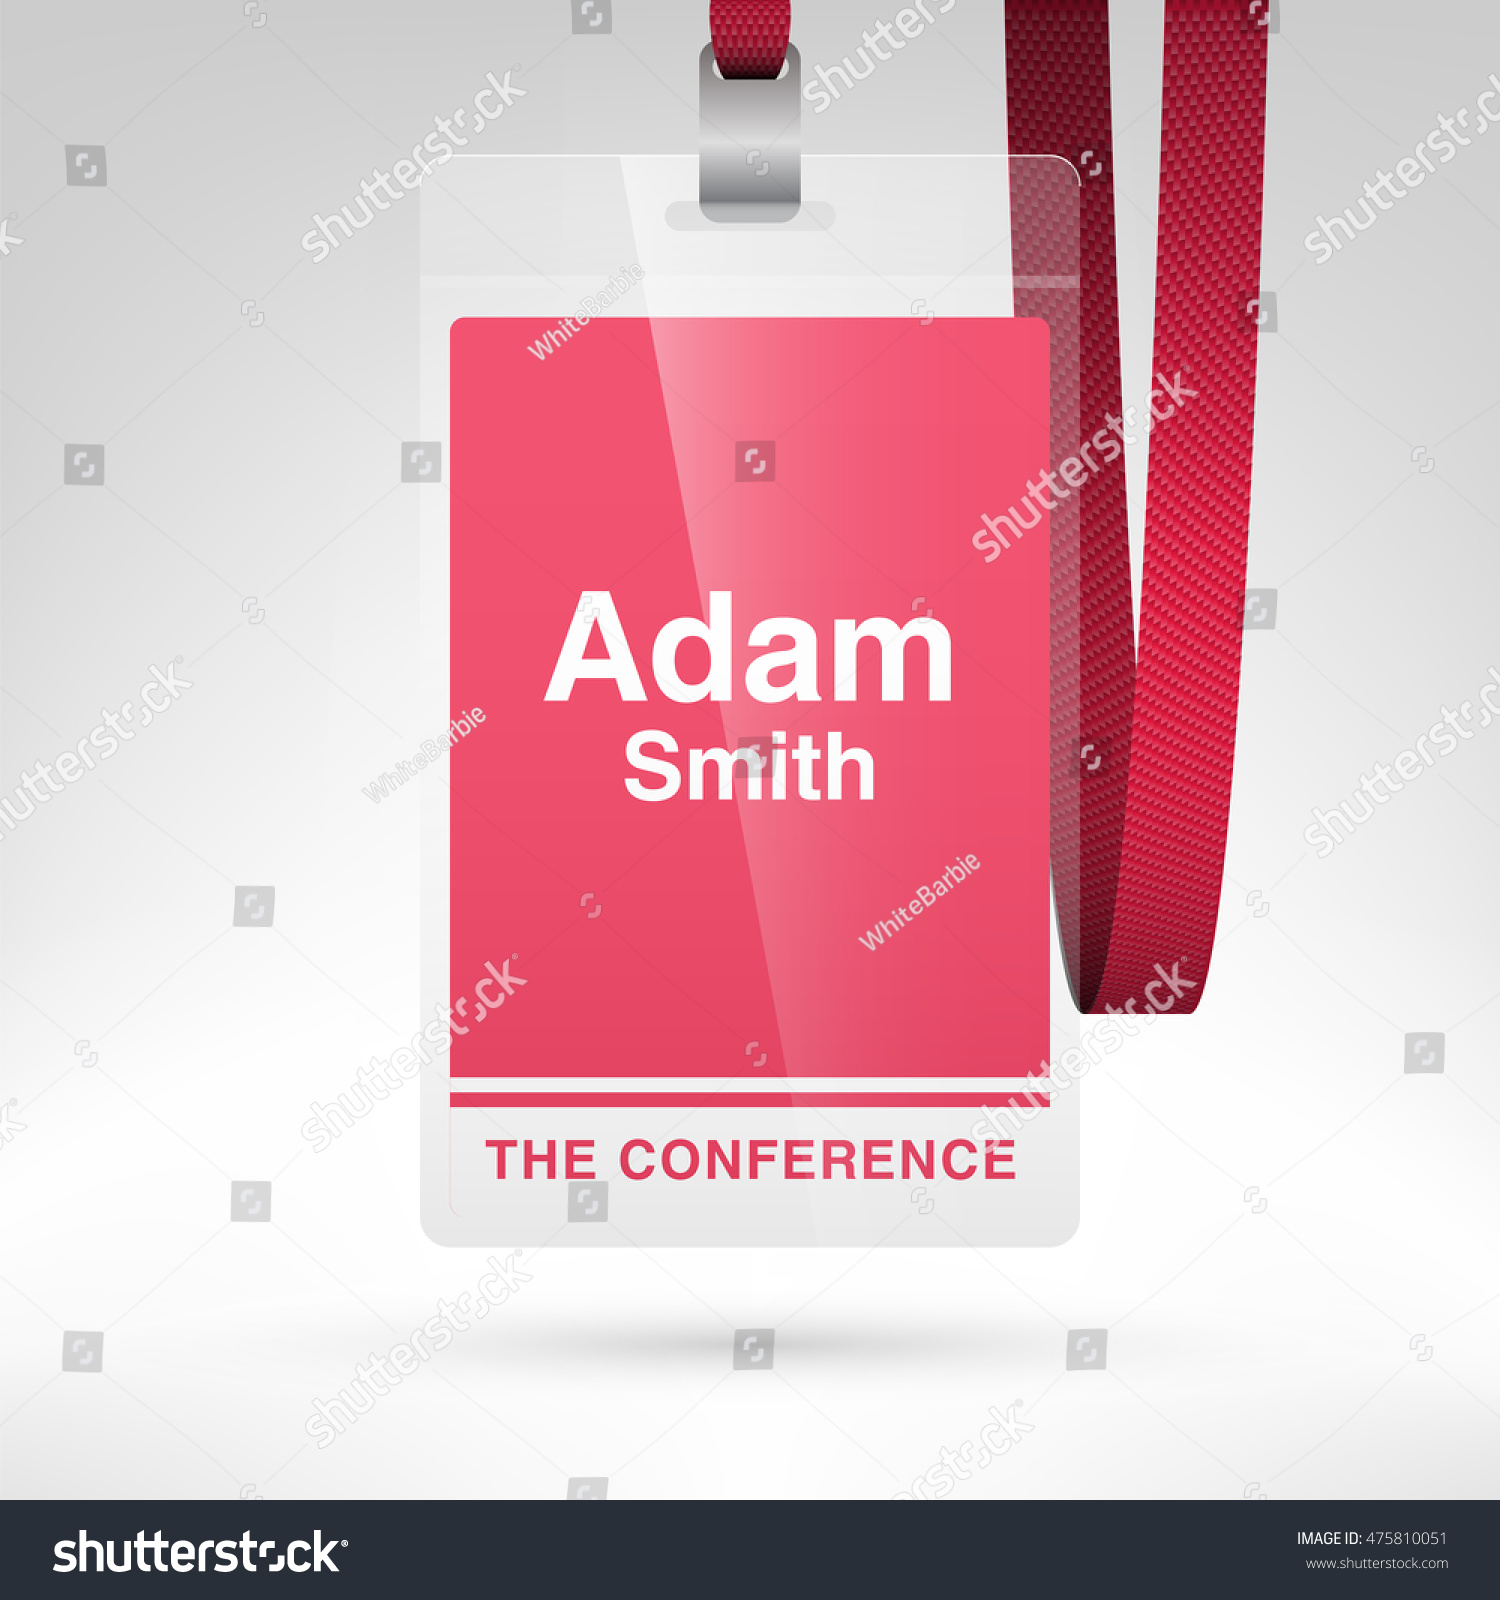 Conference Badge Name Tag Placeholder Blank Royalty Free Stock Image